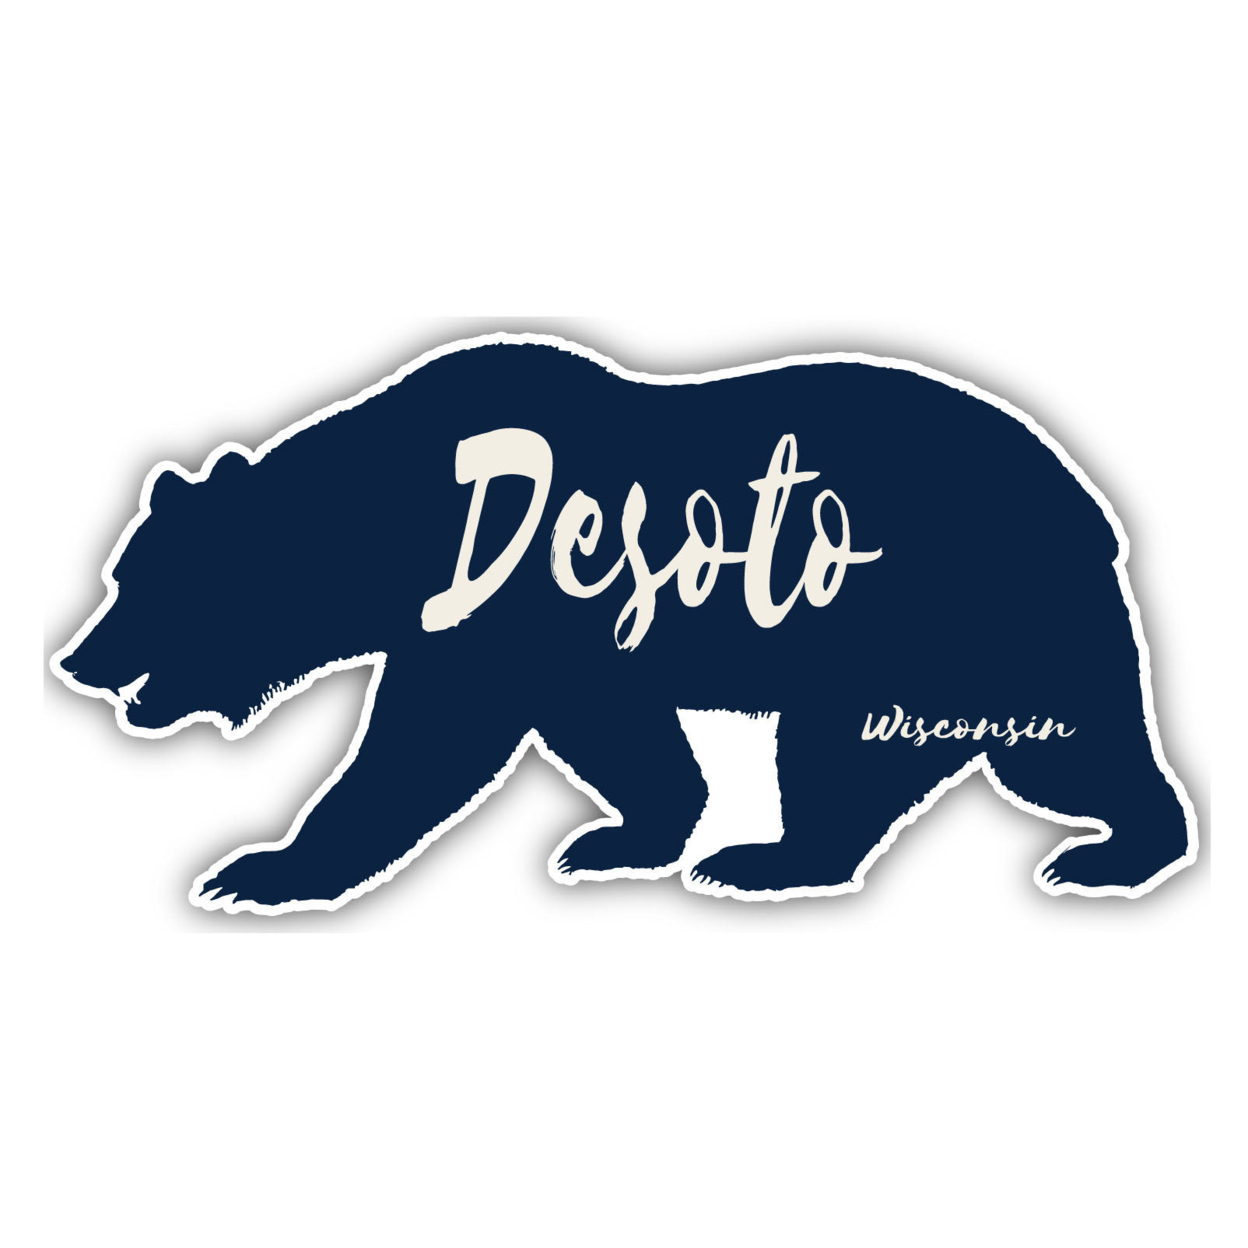 DeSoto Wisconsin Souvenir Decorative Stickers (Choose Theme And Size) - 4-Pack, 8-Inch, Bear